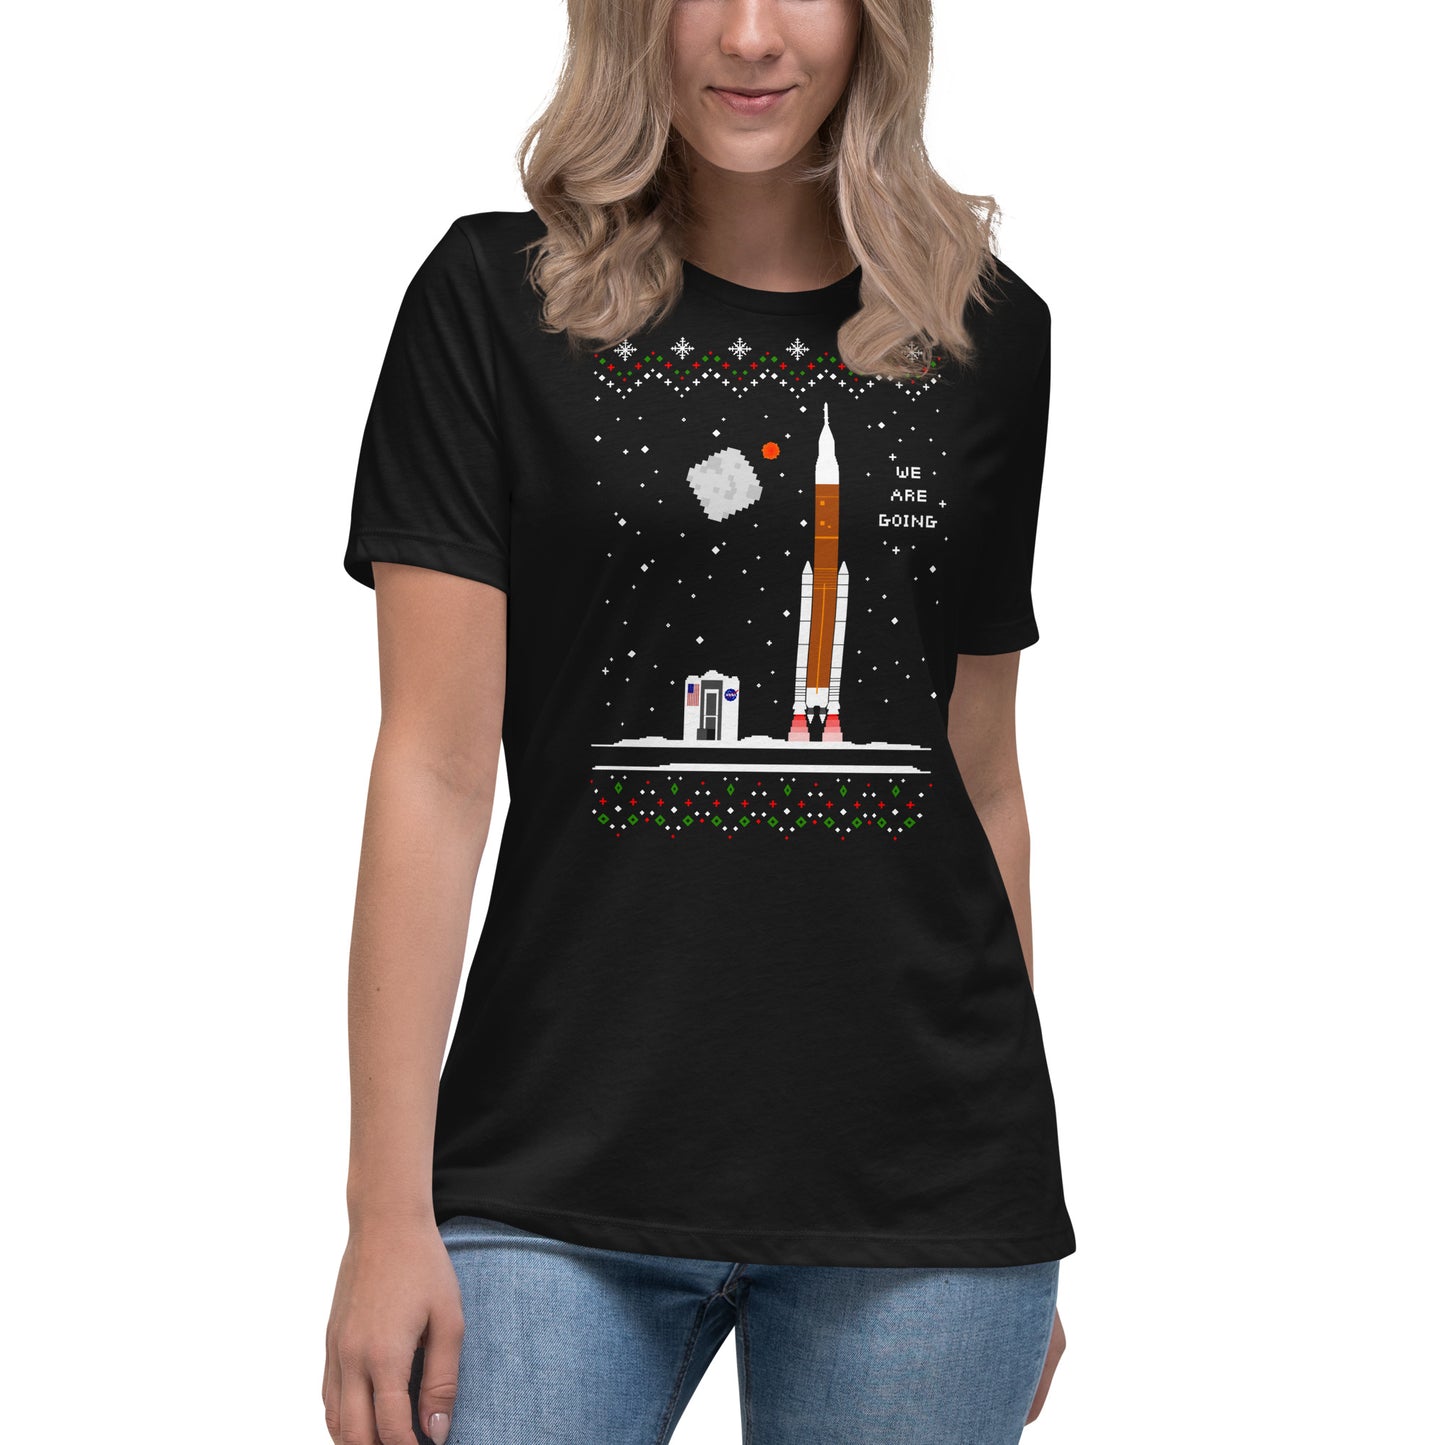 We Are Going Ugly Women's Space Tee (Limited Edition)